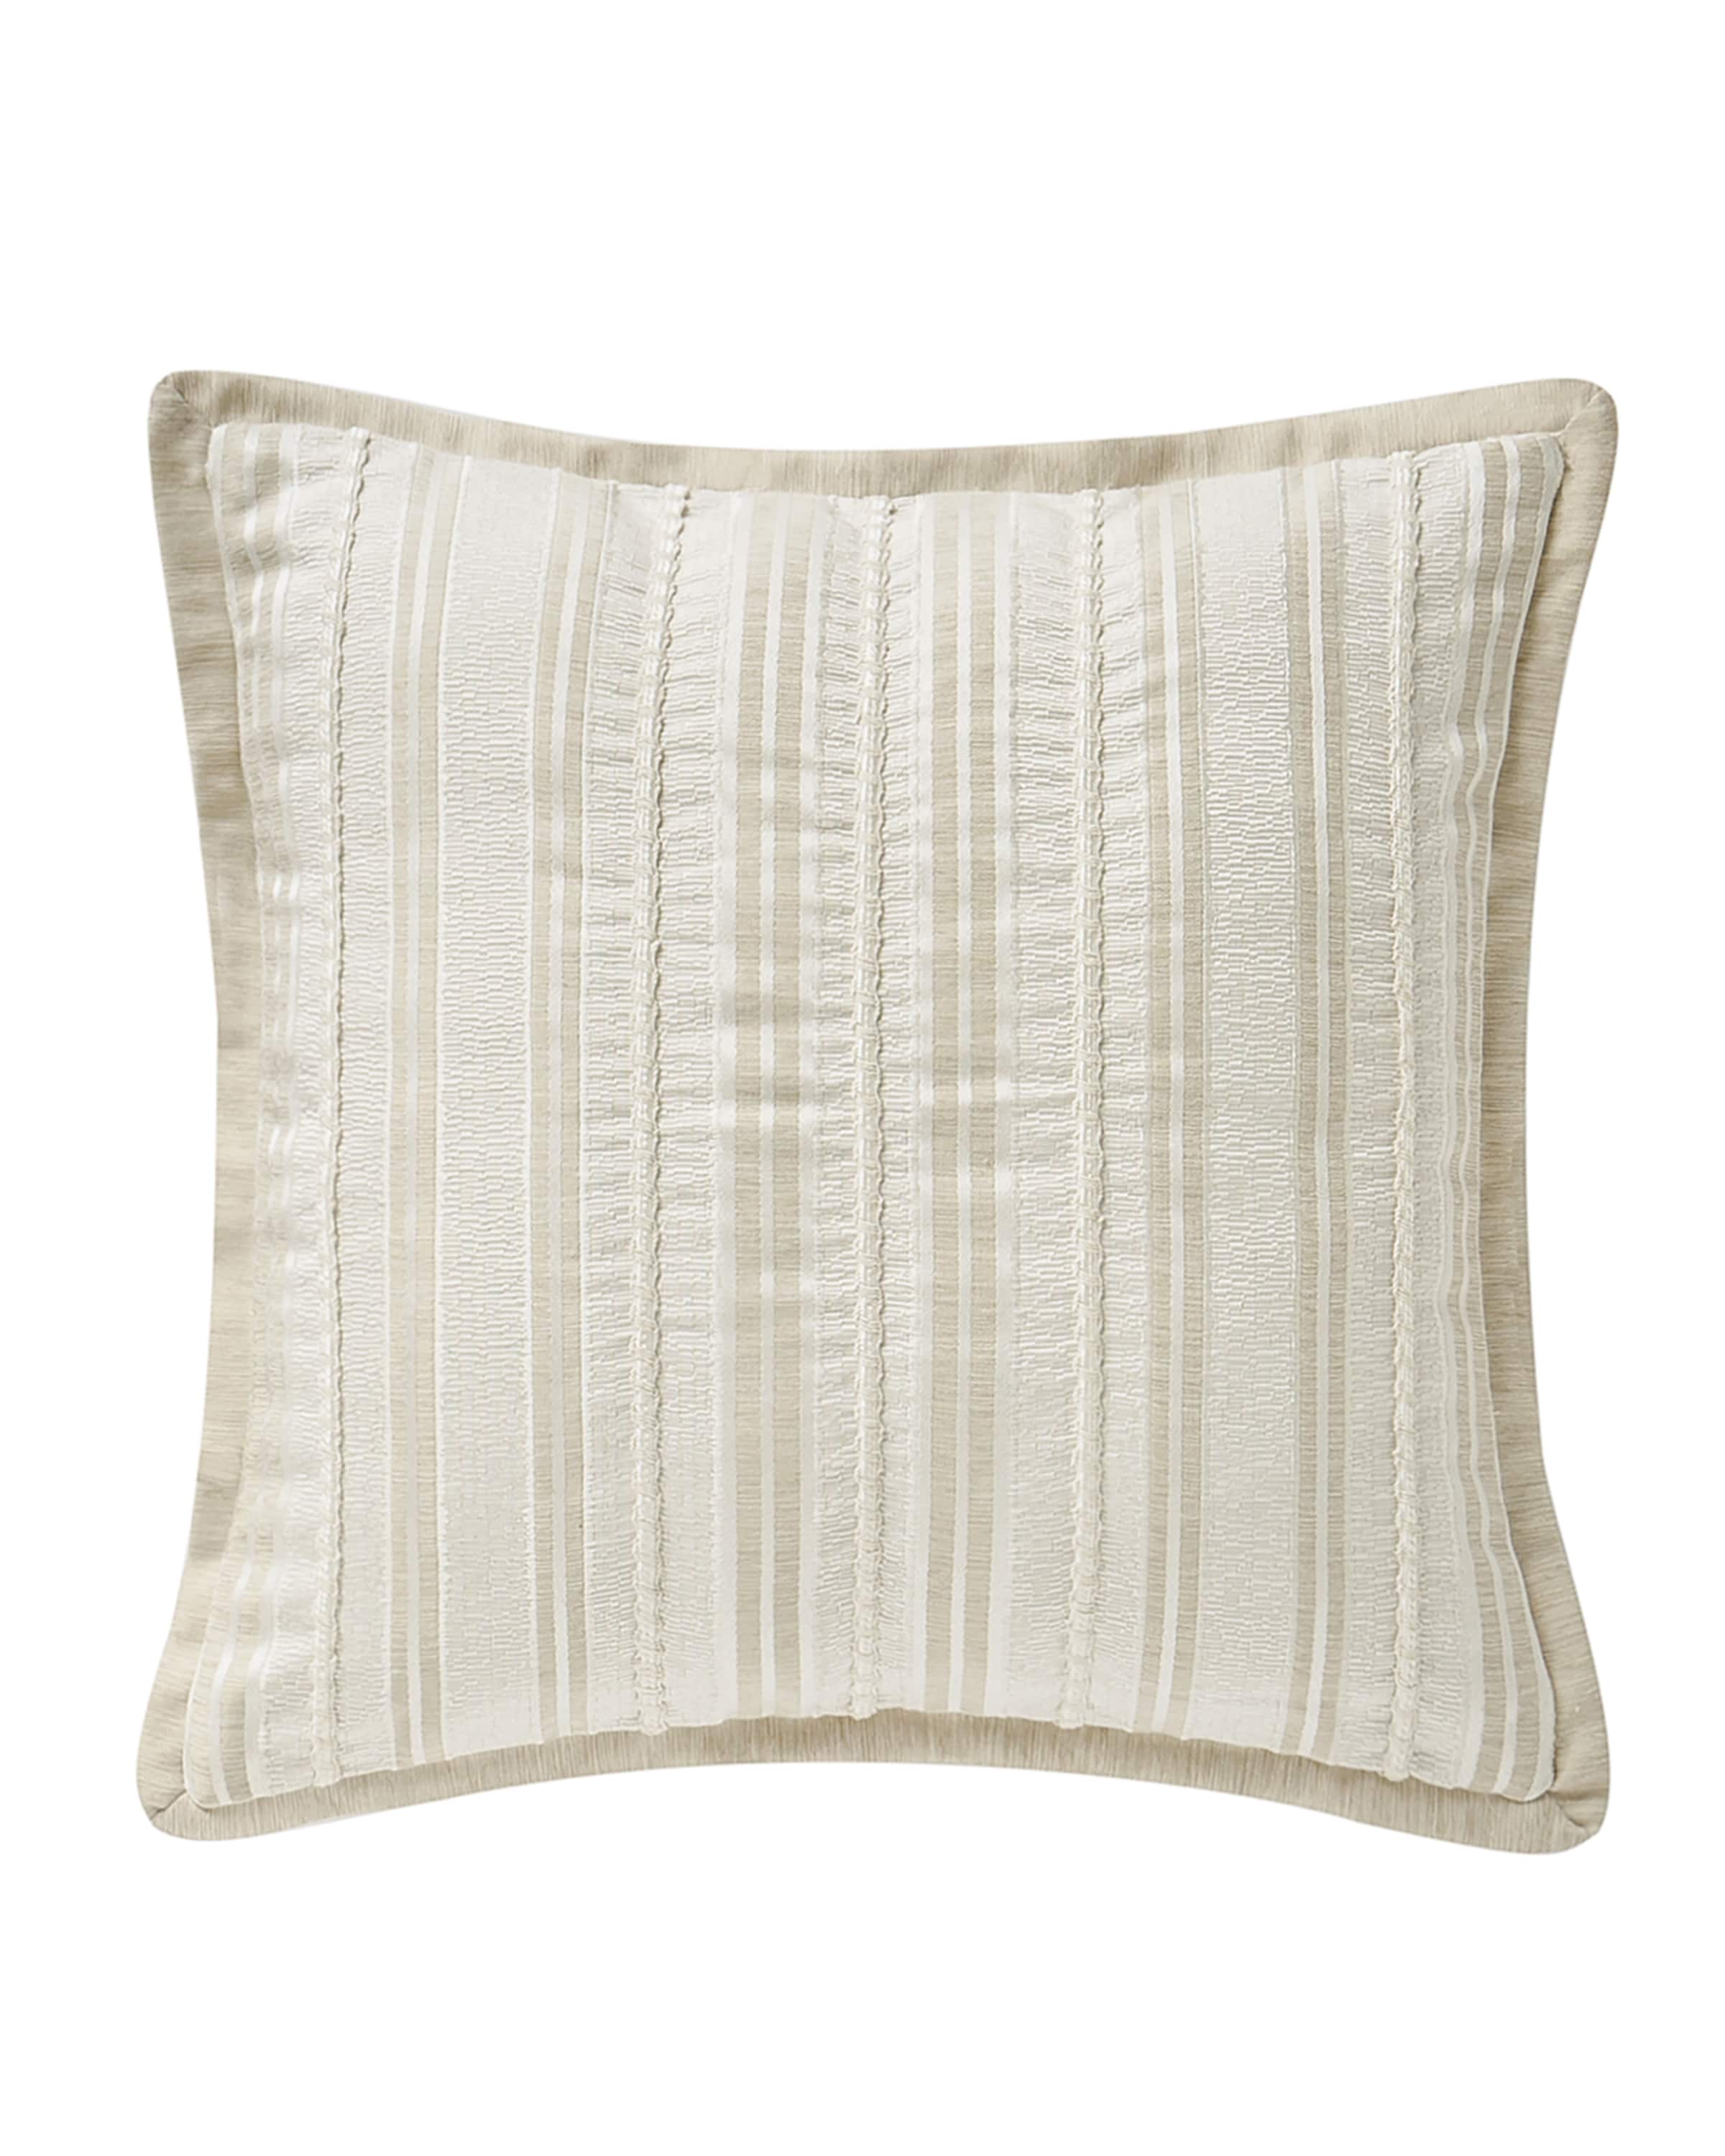 Waterford Lancaster Square Decorative Pillow, 14"Sq.